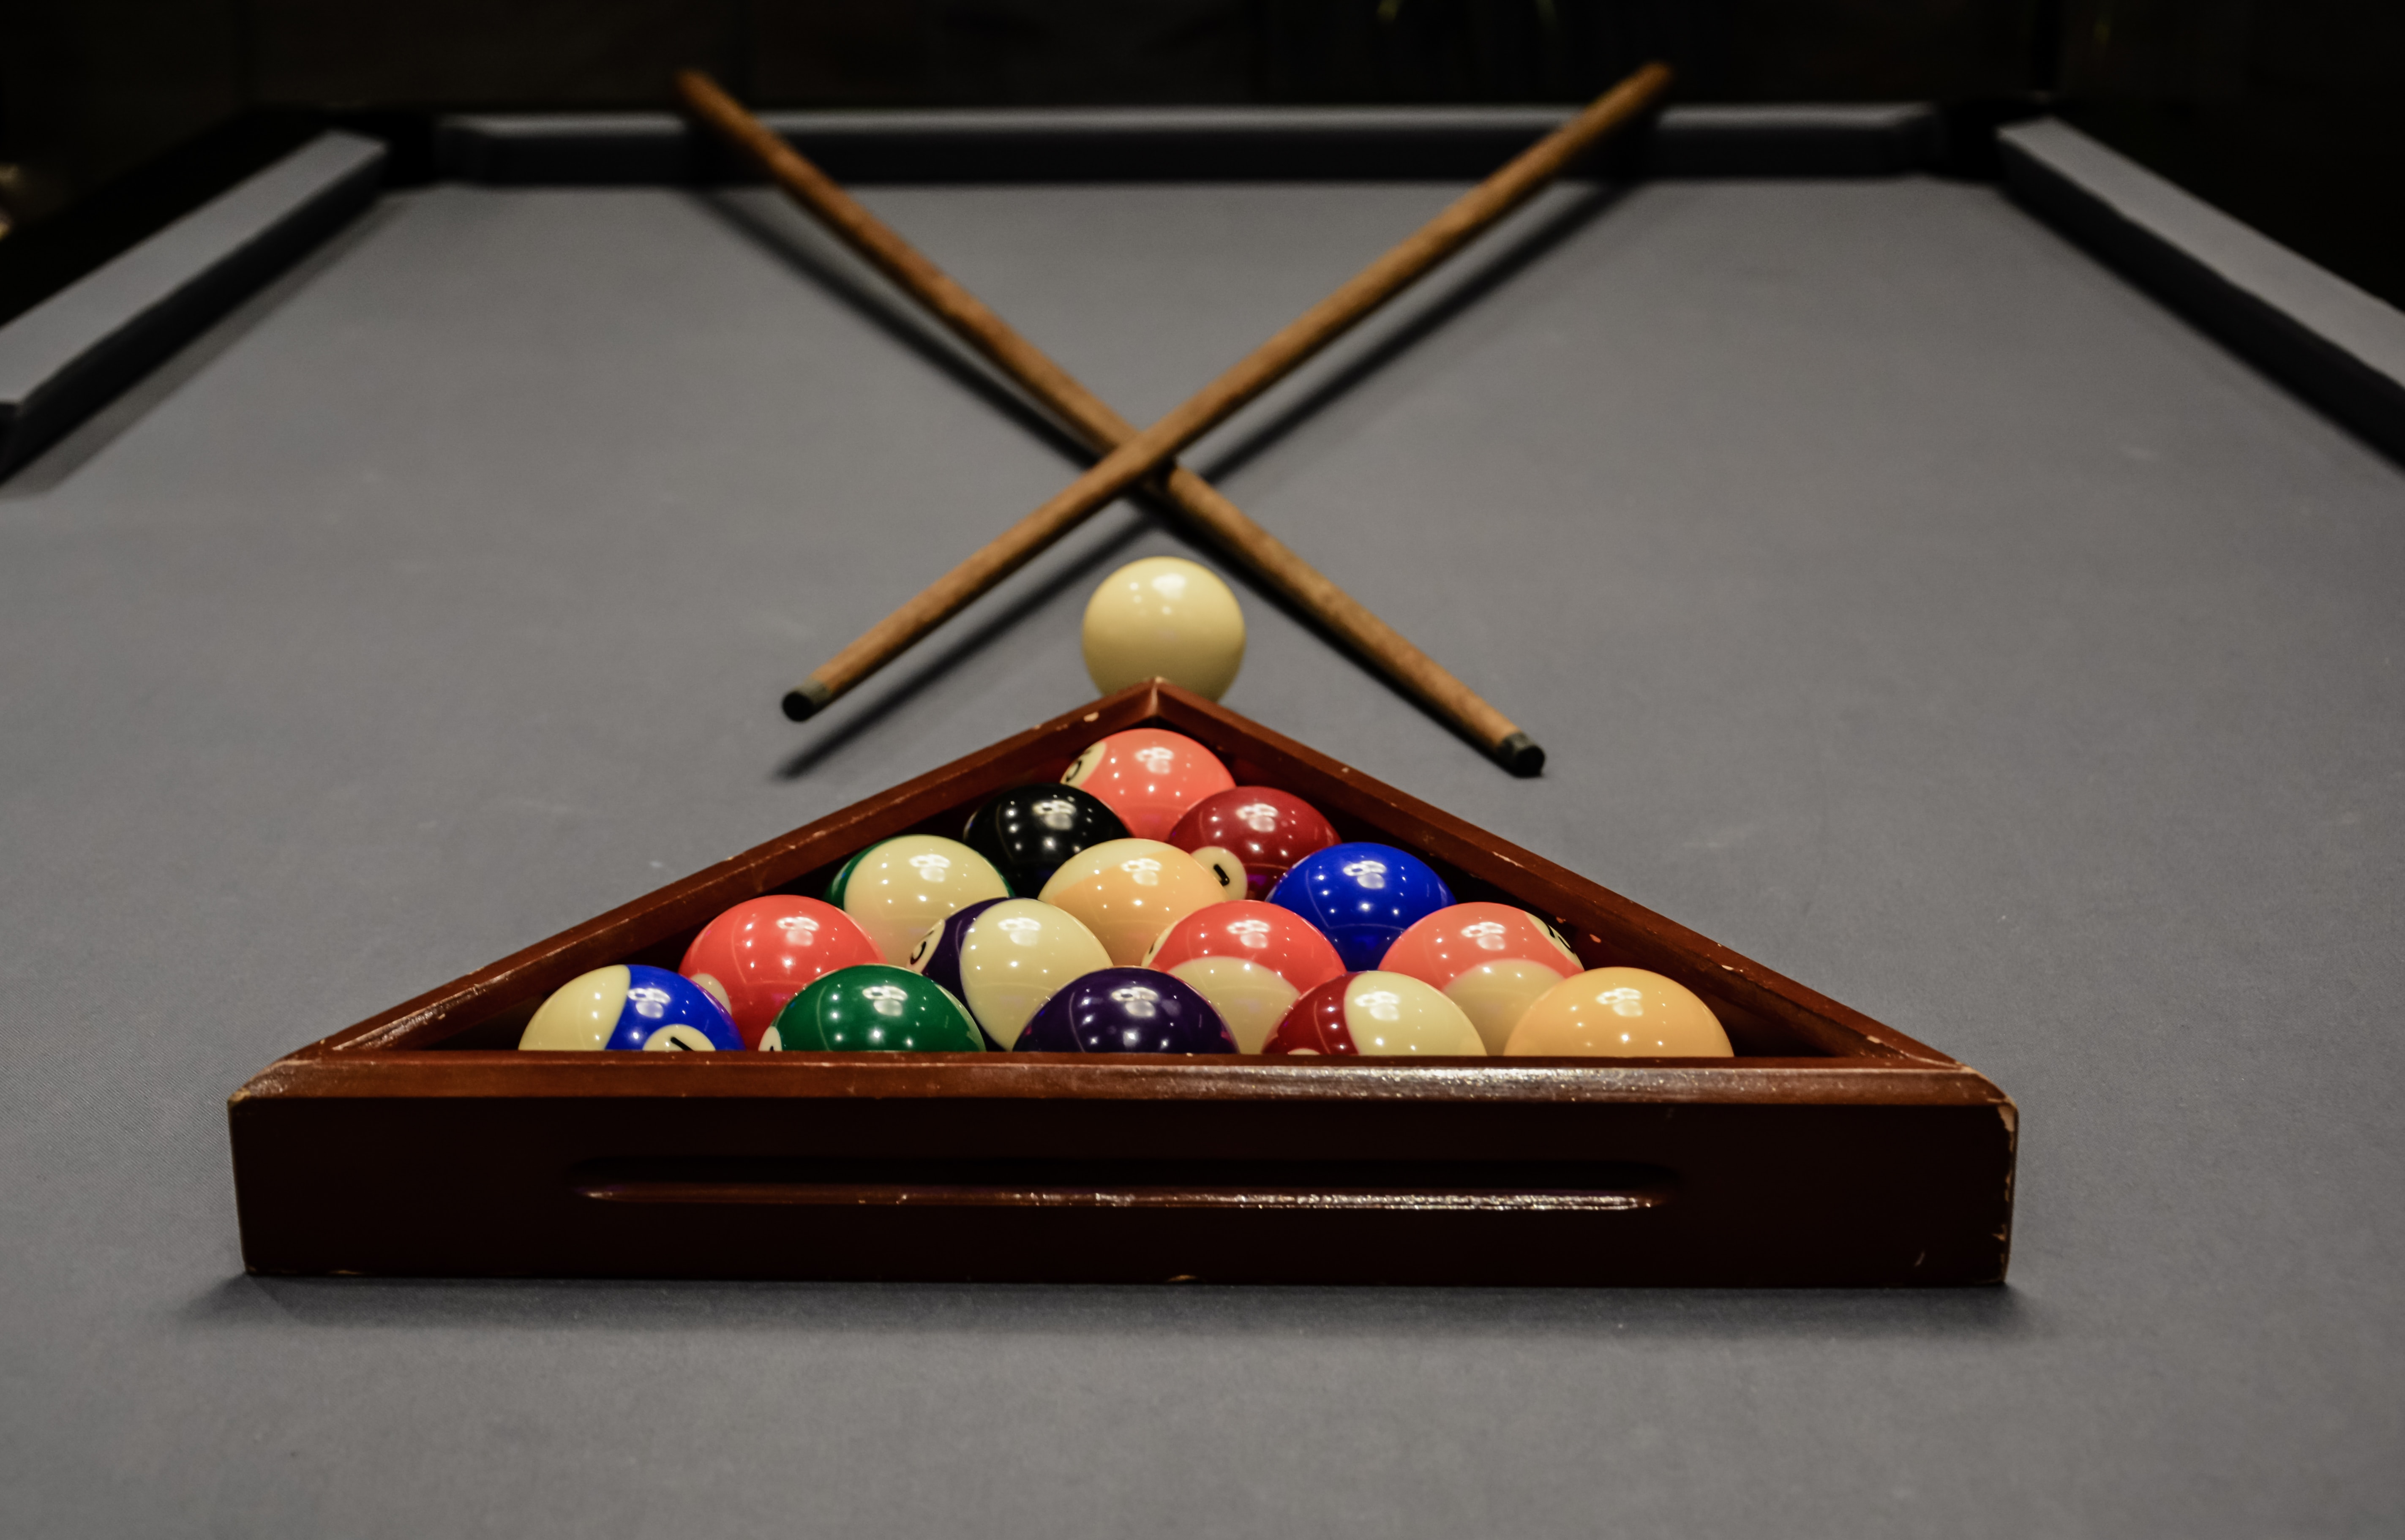 Racked pool balls and cues on a billiard table